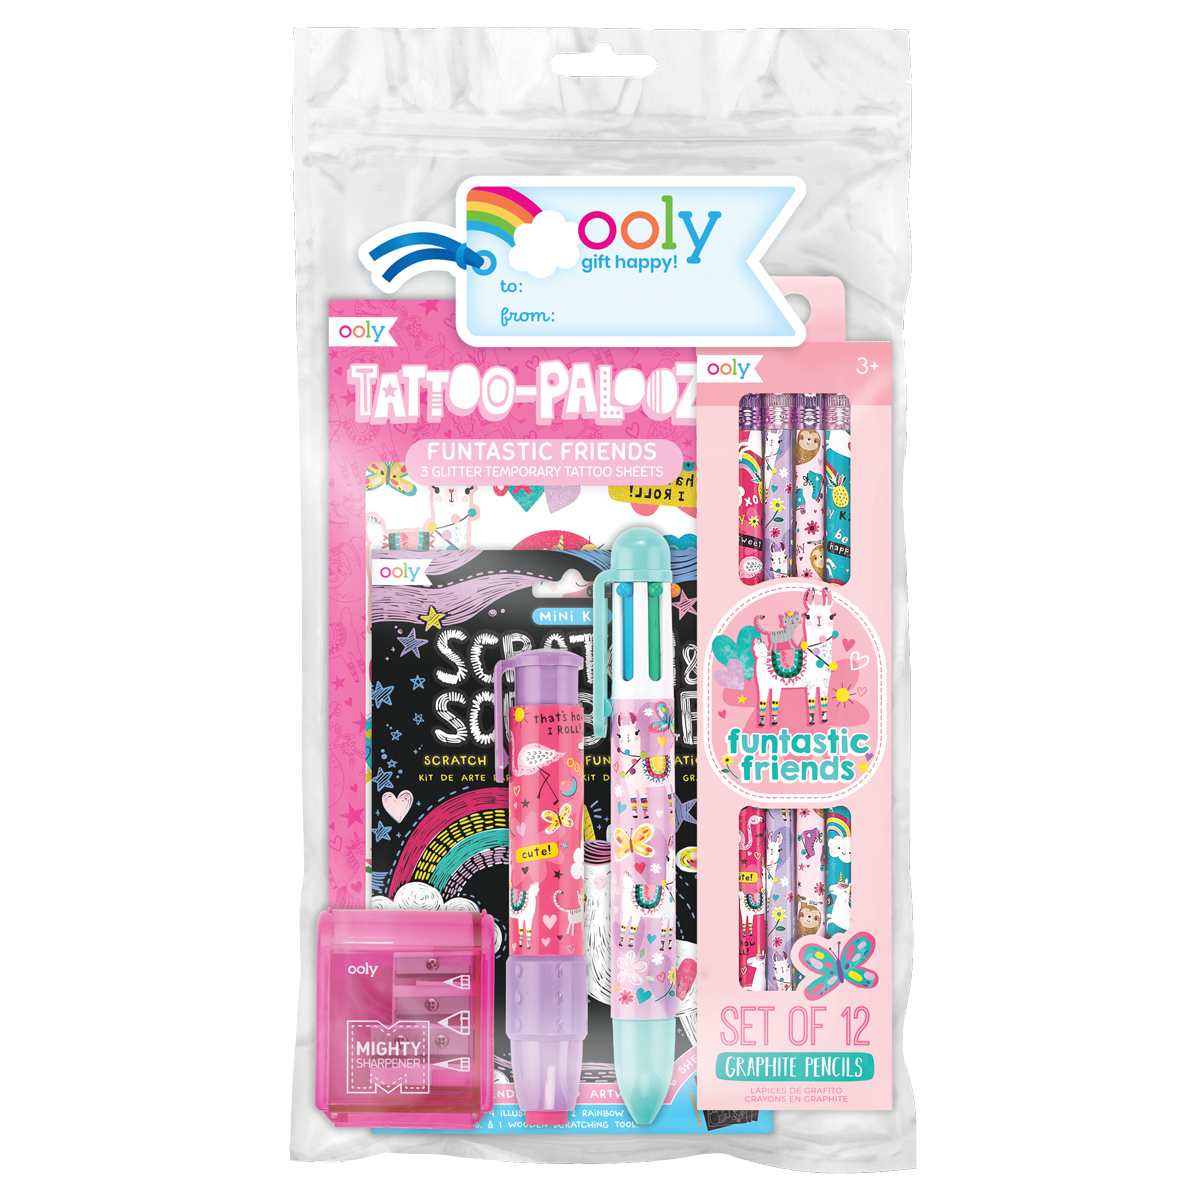 OOLY Funtastic Friends Activity Happy Pack in gift packaging